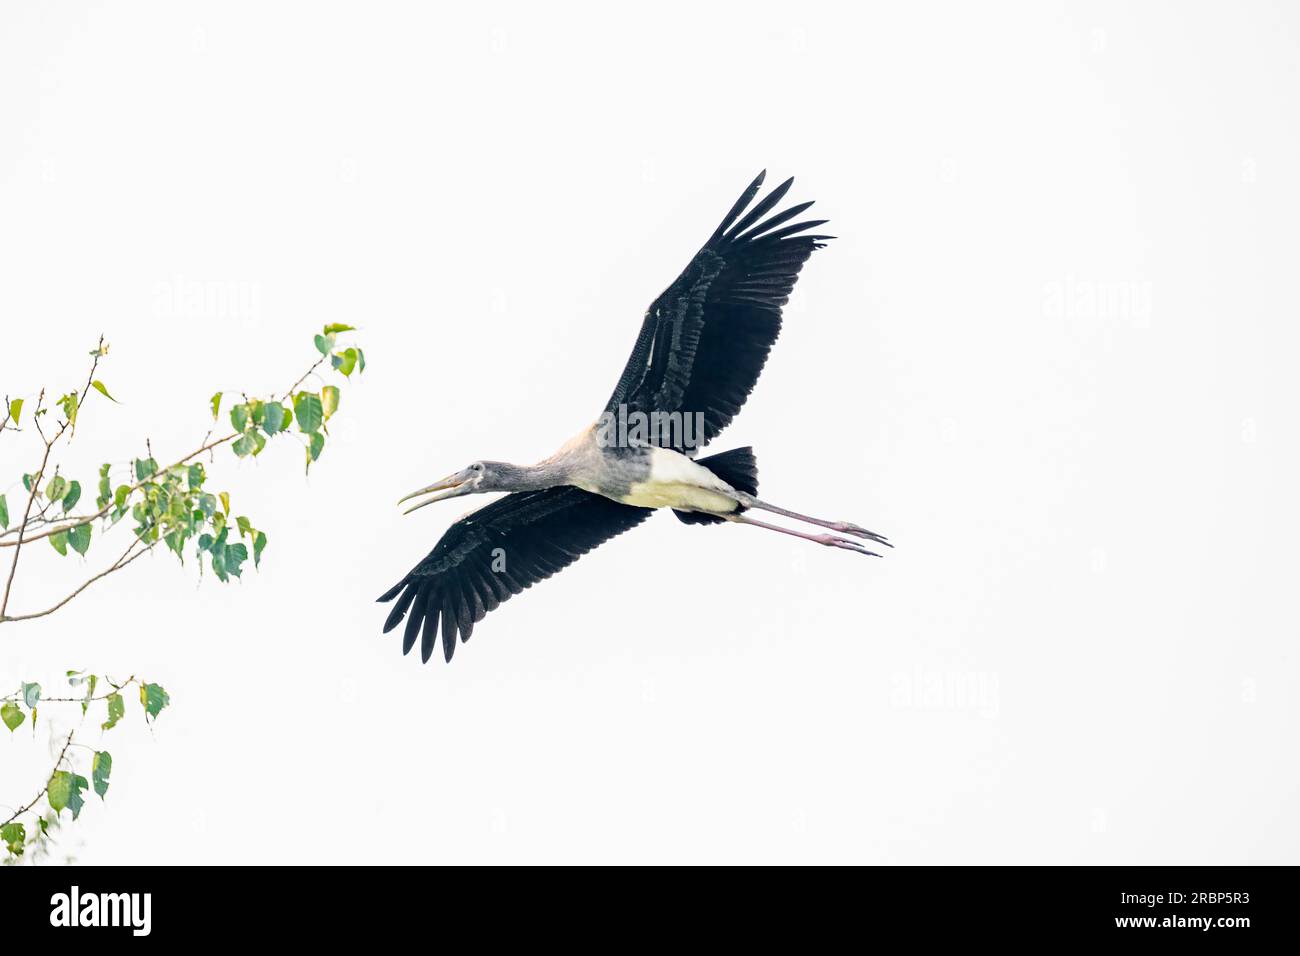 A Painted stork Calling while flying Stock Photo